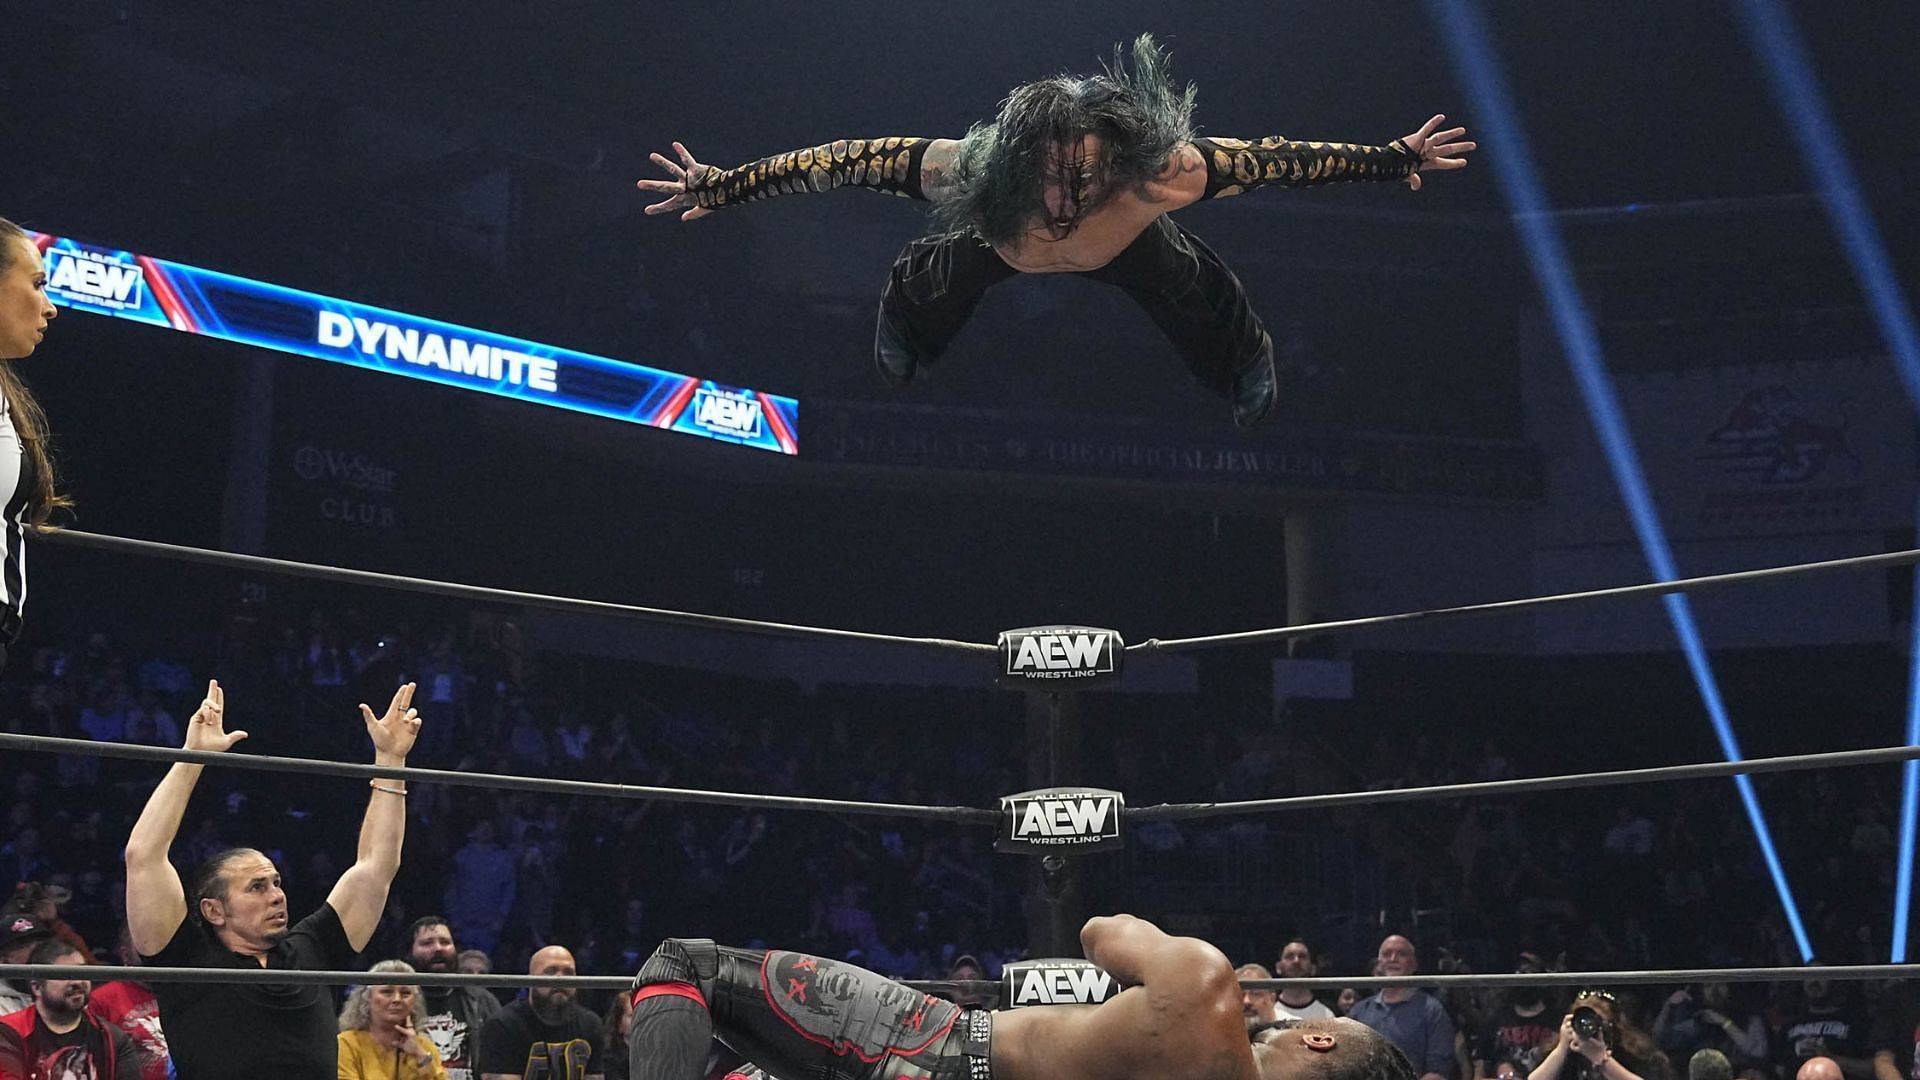 Matt and Jeff Hardy are one of the most iconic tag teams of all time [Photo courtesy of AEW